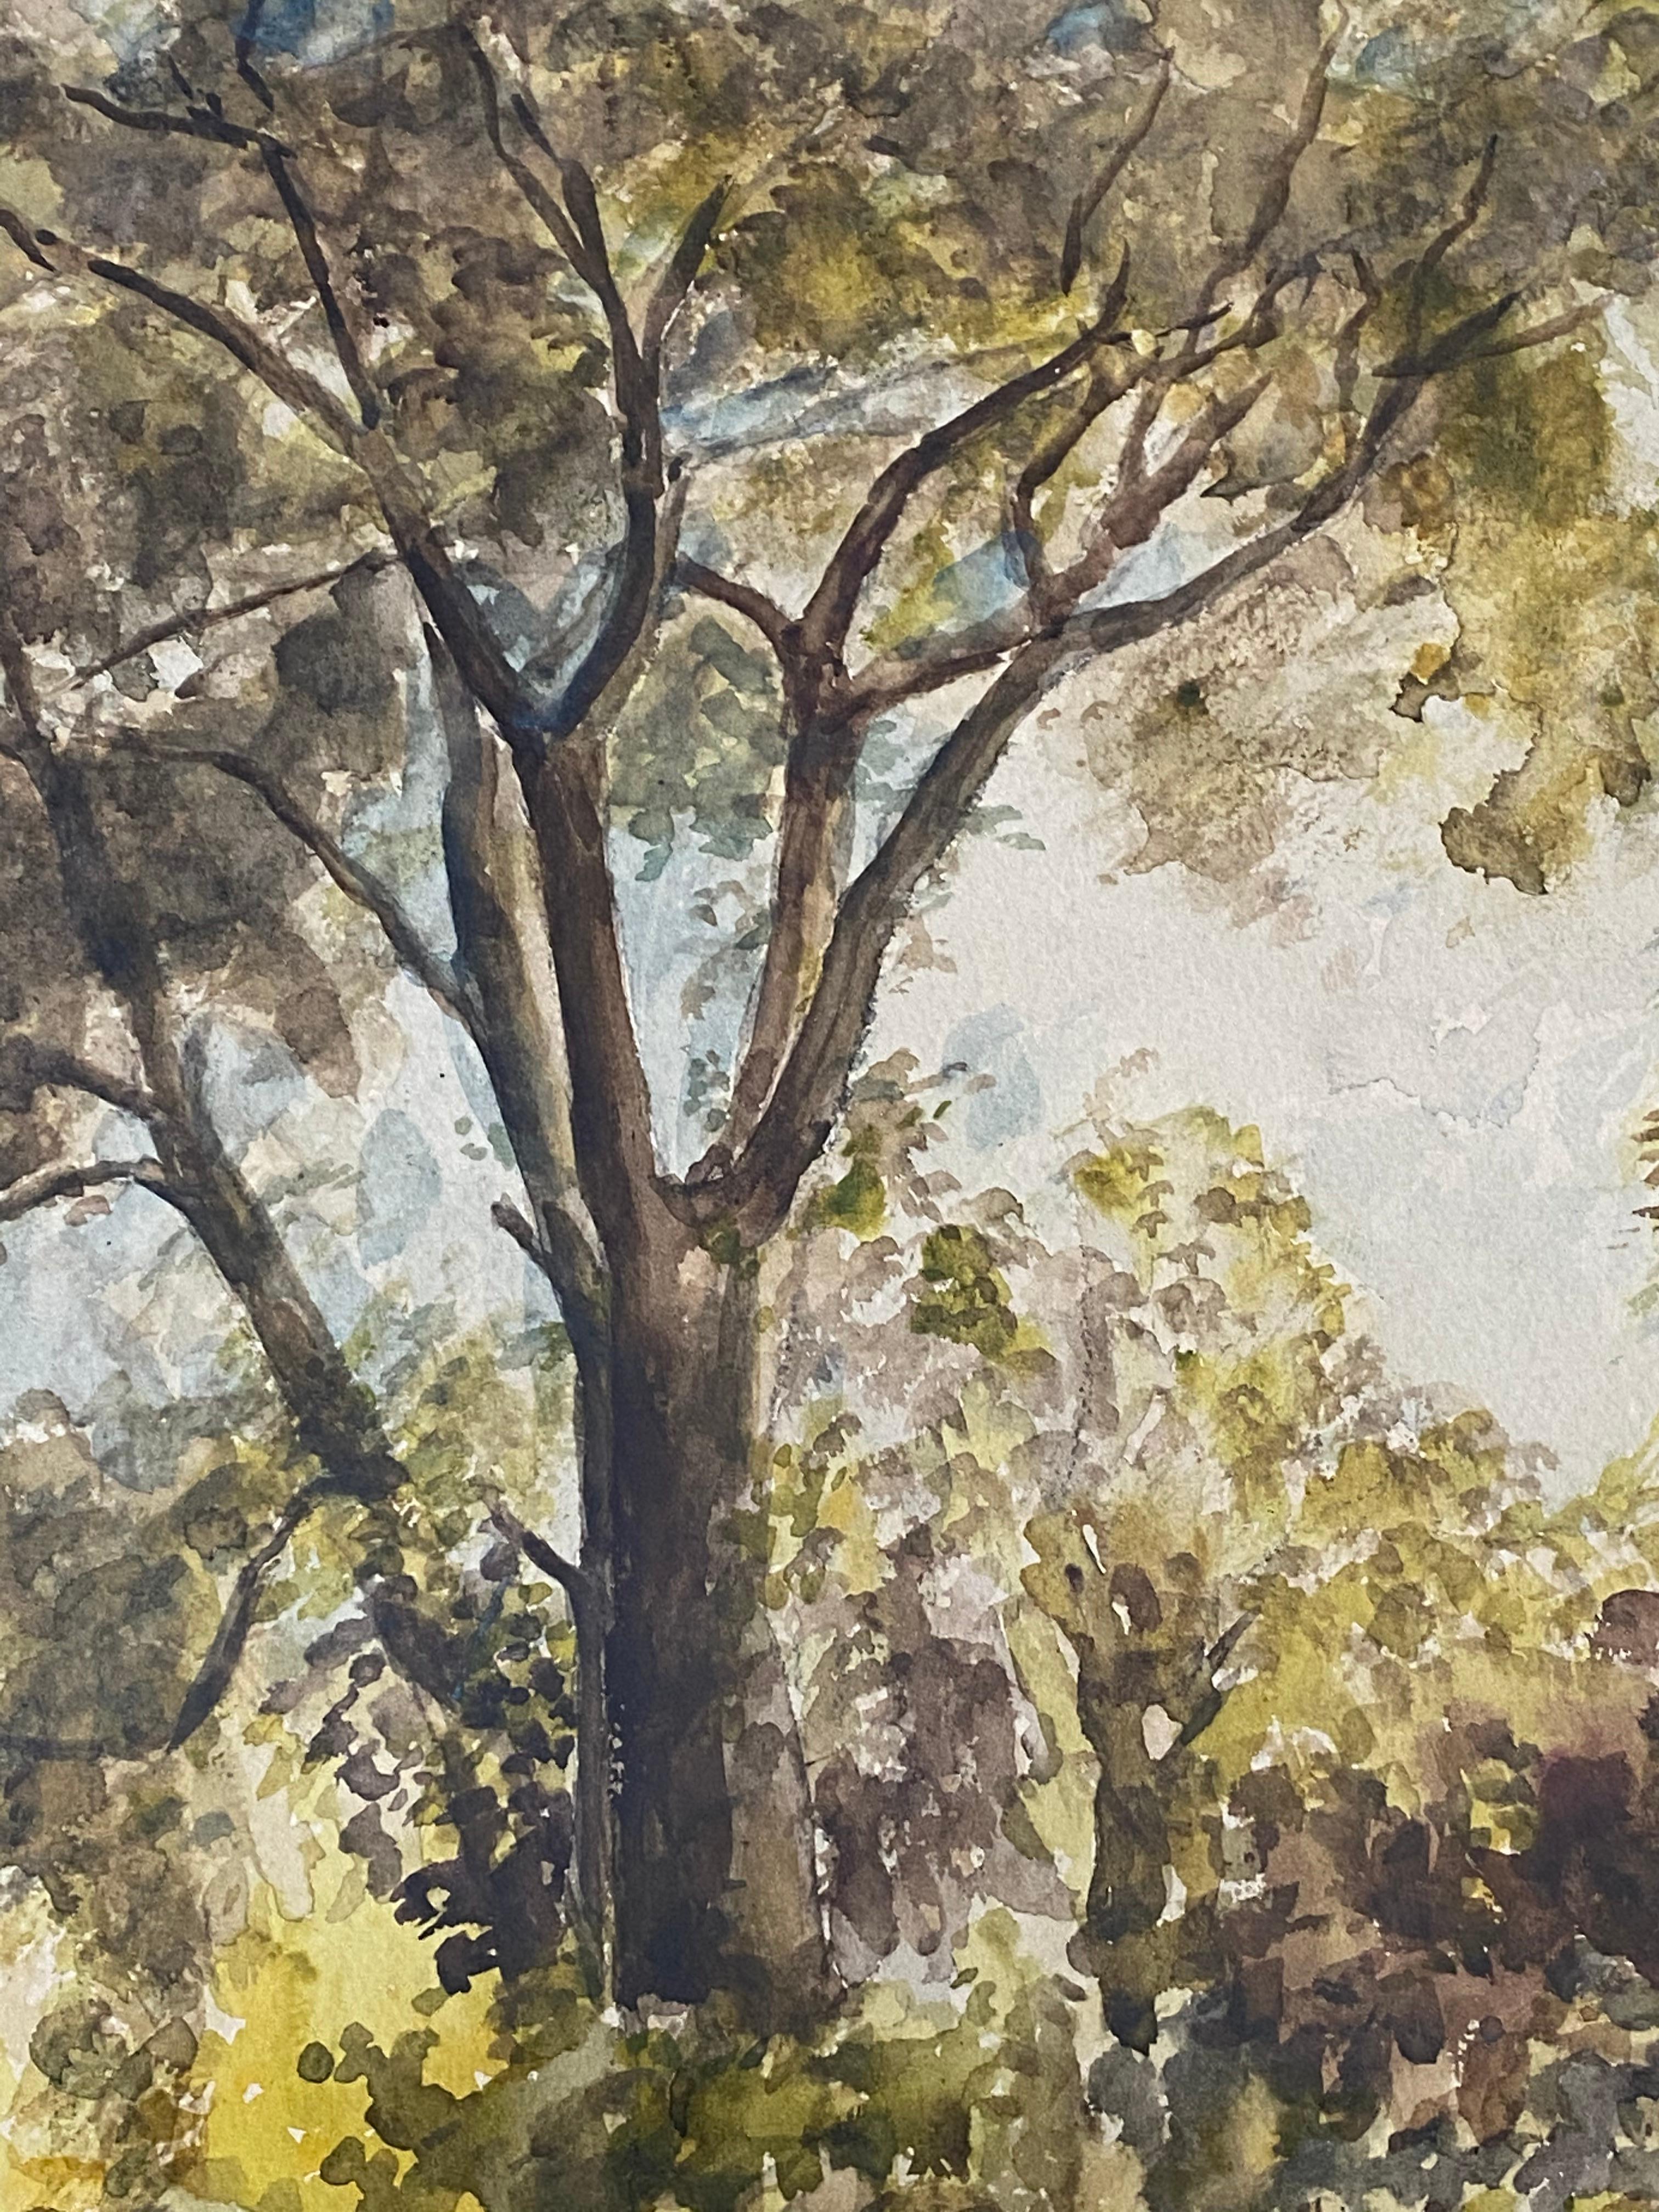 Vintage Watercolor Forested Landscape by Taylor C.1932

Lush forested landscape original watercolor signed 